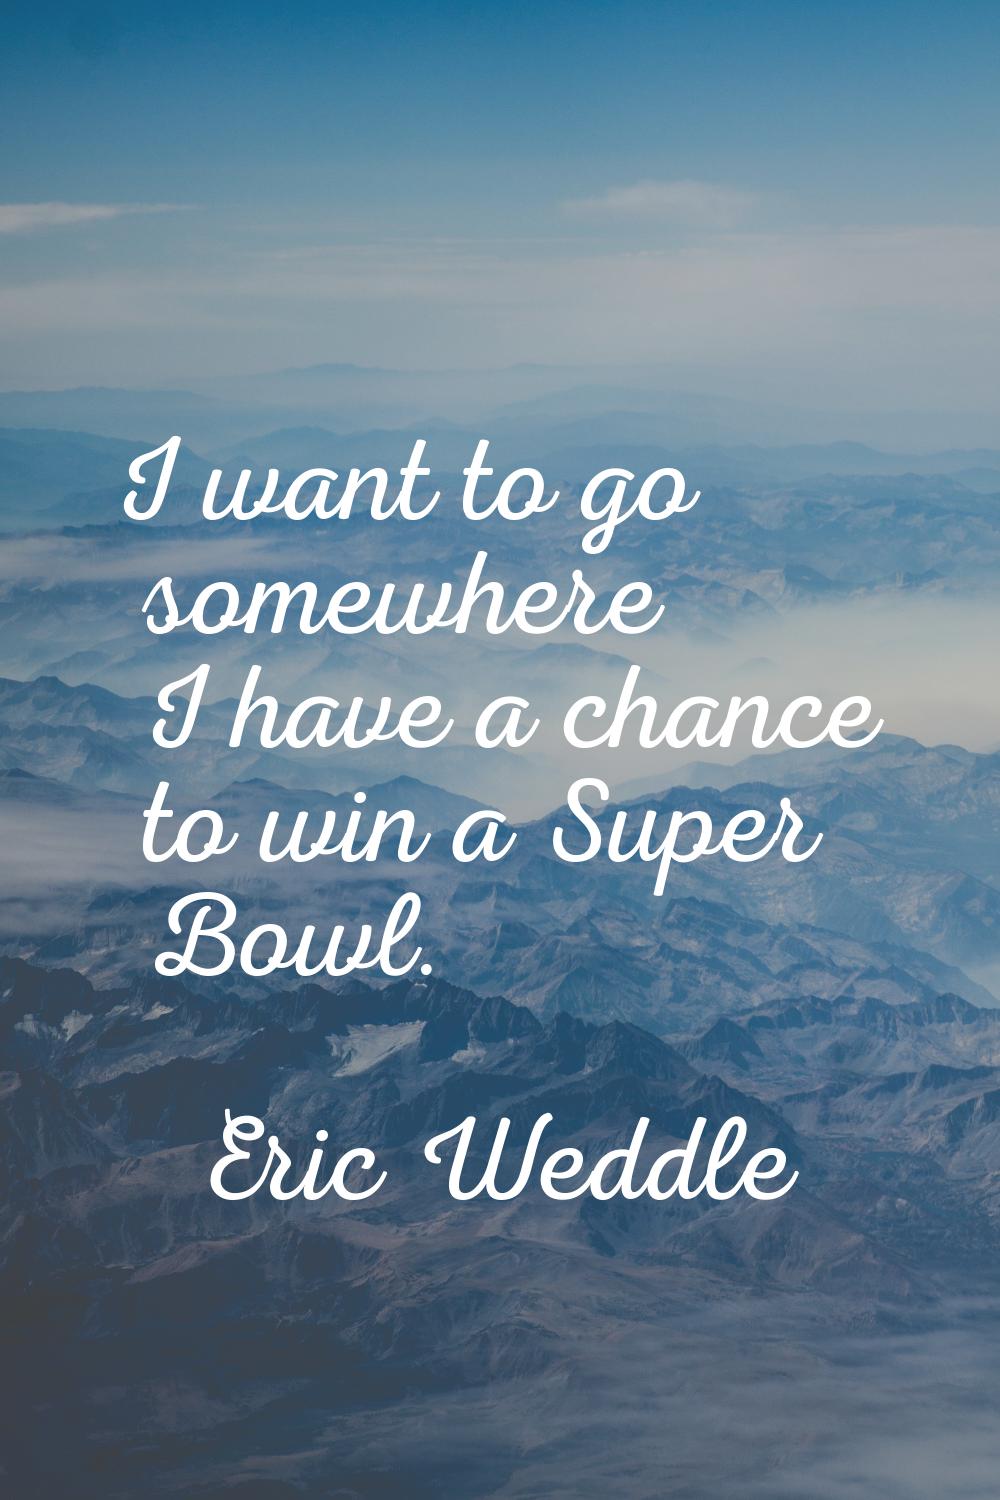 I want to go somewhere I have a chance to win a Super Bowl.